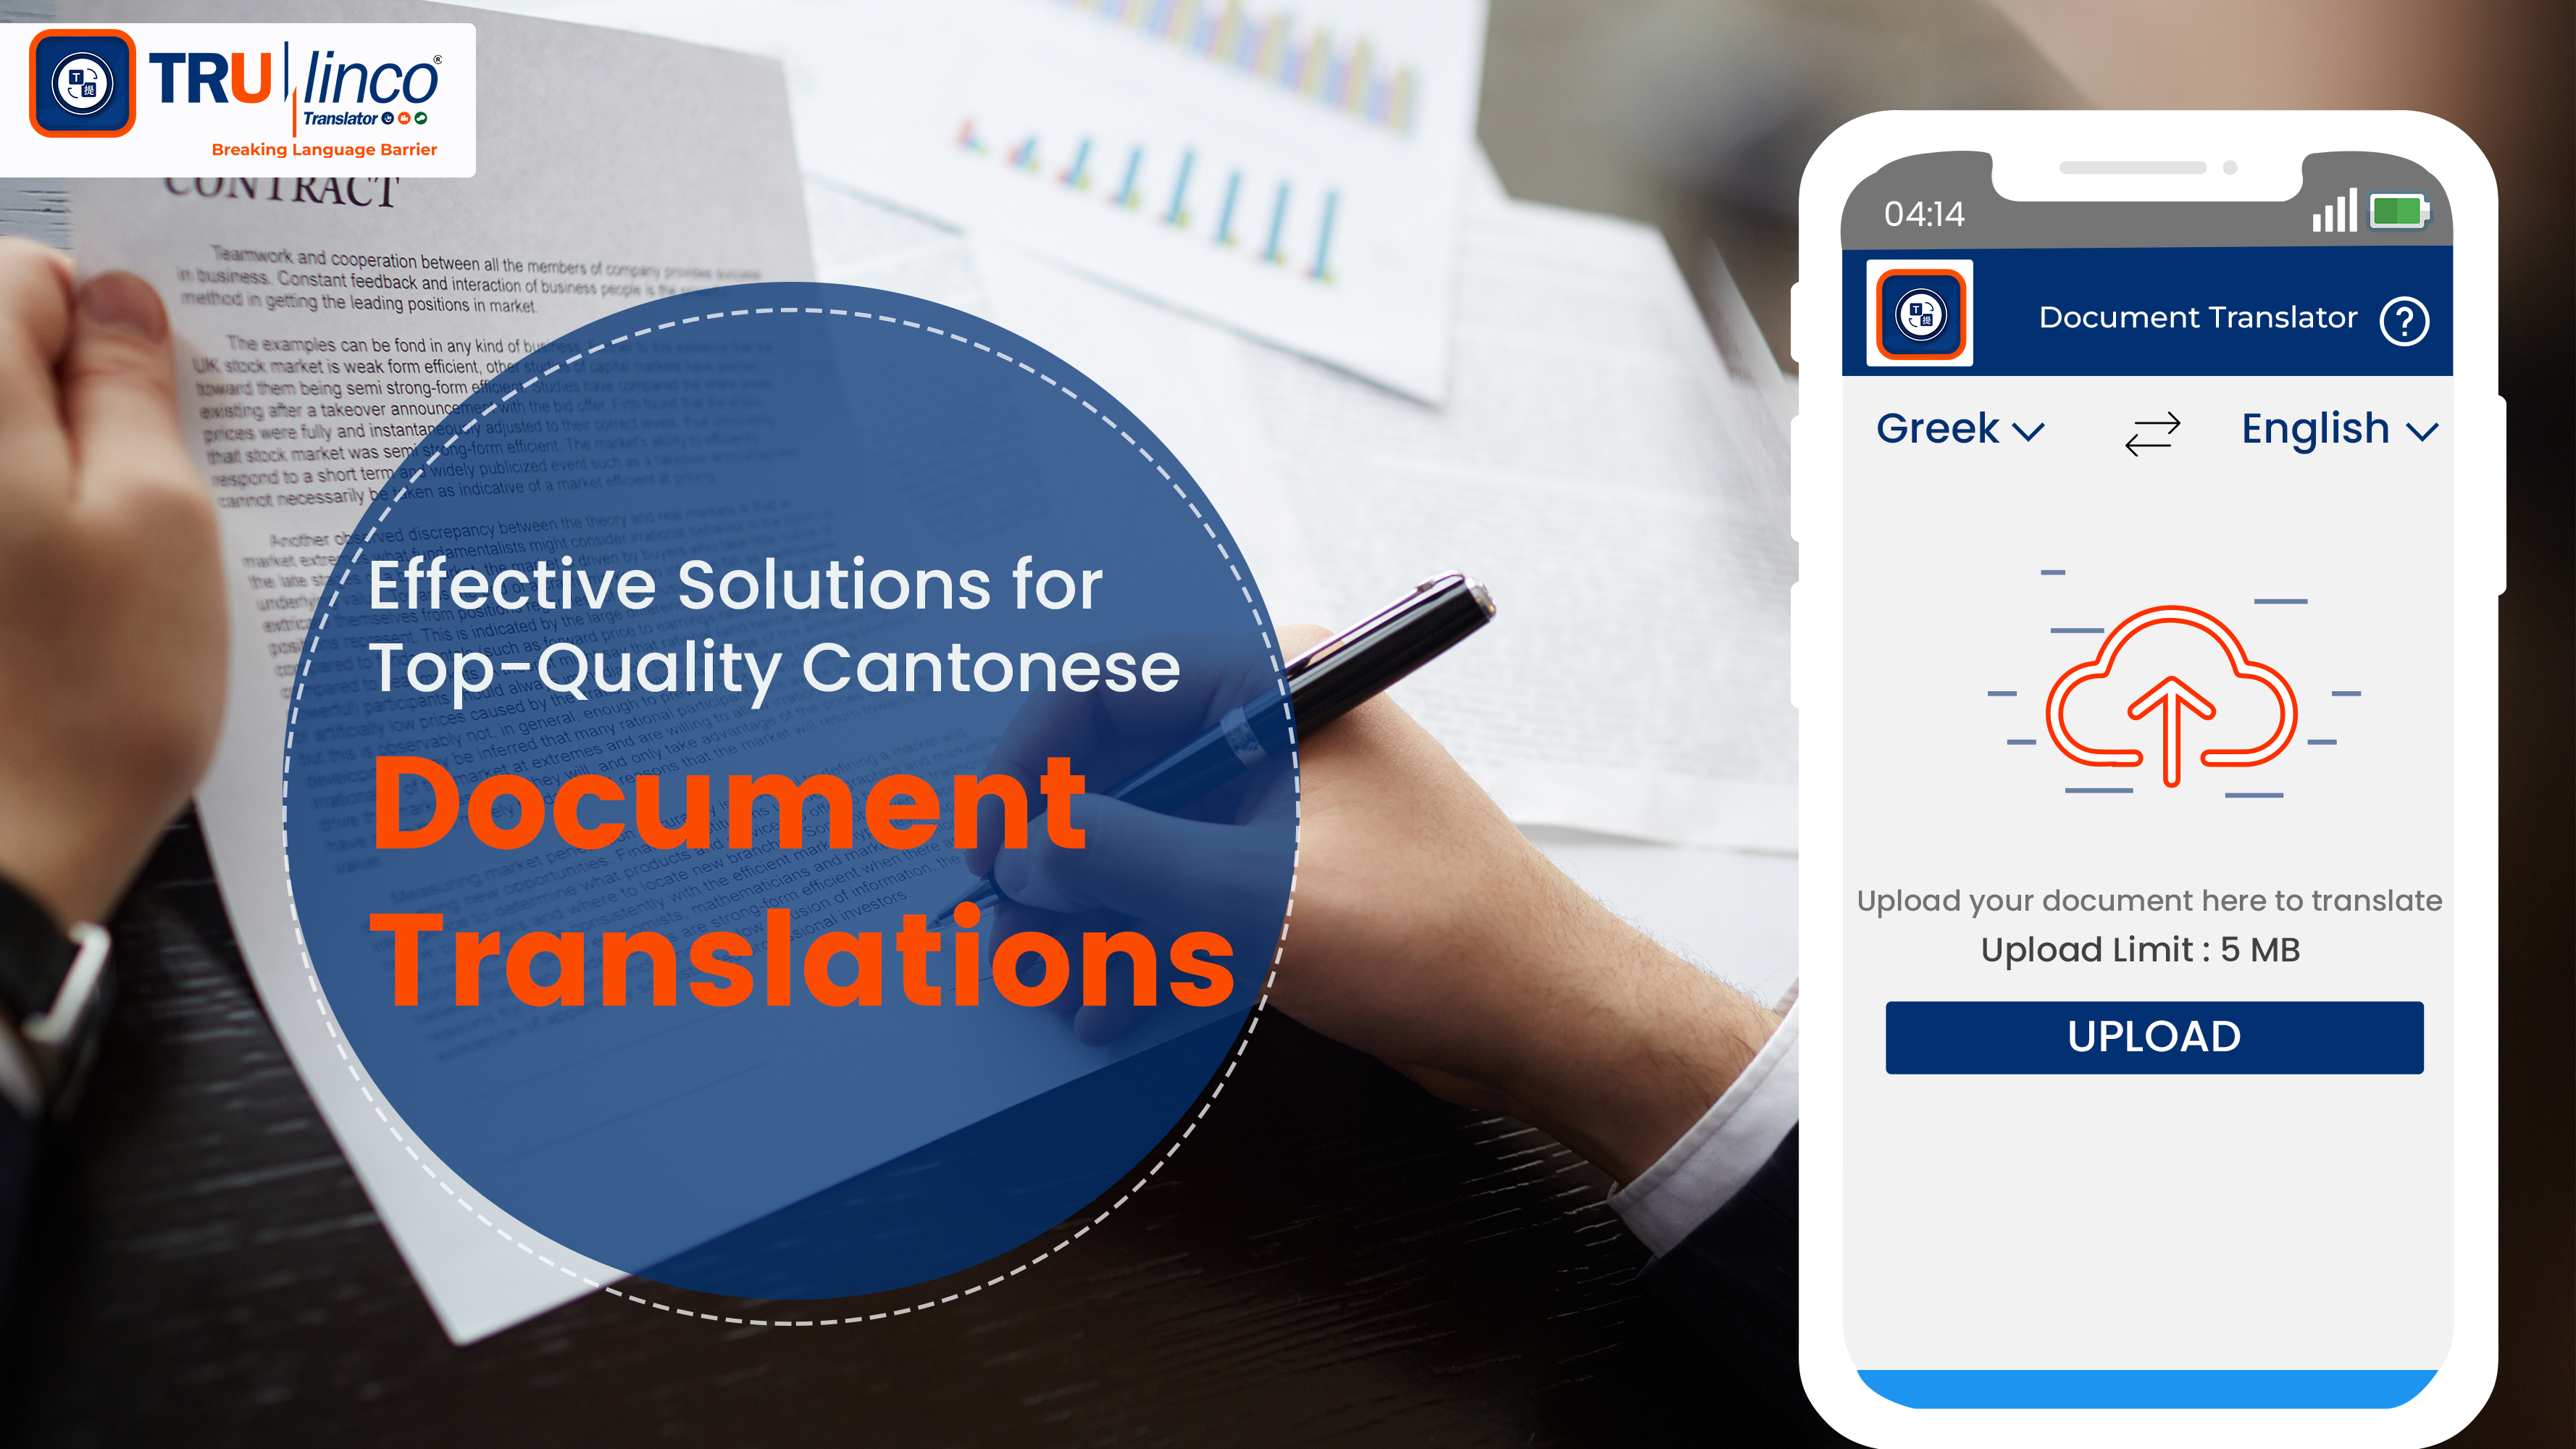 Effective Solutions for Top-Quality Cantonese Document Translations